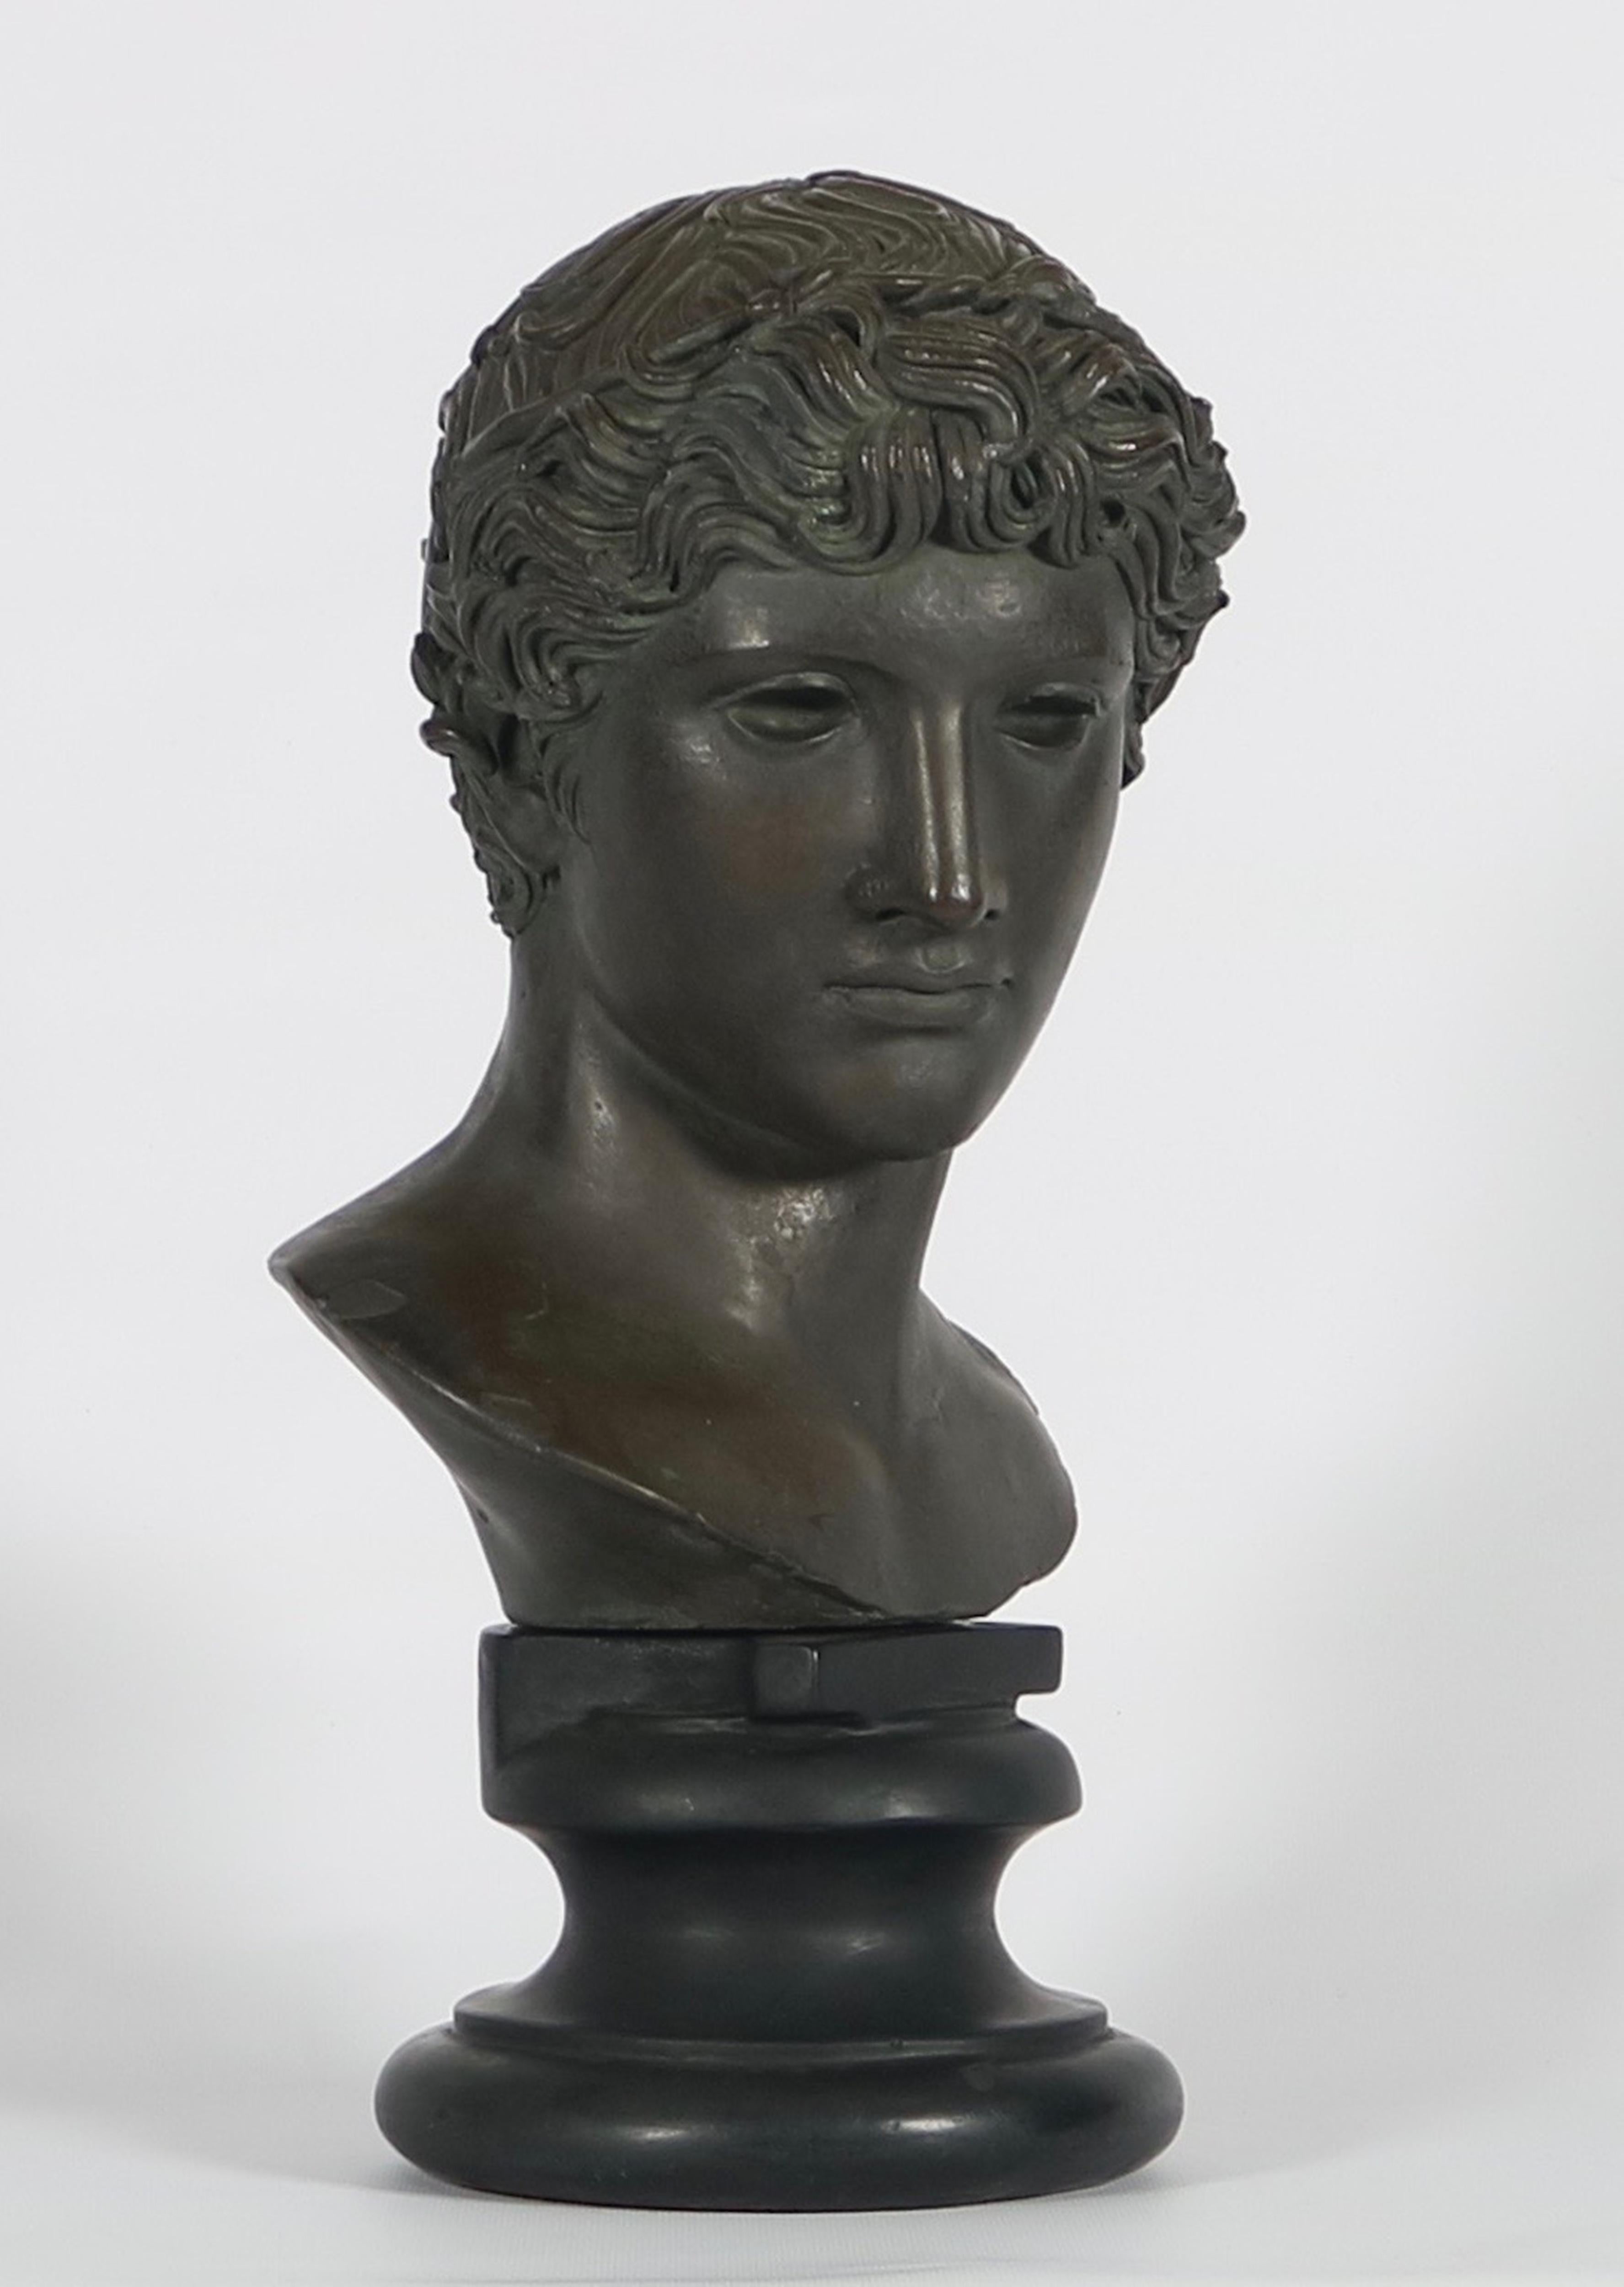 Greco-Roman bust reproduced by Alva Studios in black cast stone. The sculpture depicts a youth with a circlet tied around his curls. Wear appropriate to age and use. The bust remains in very good condition.